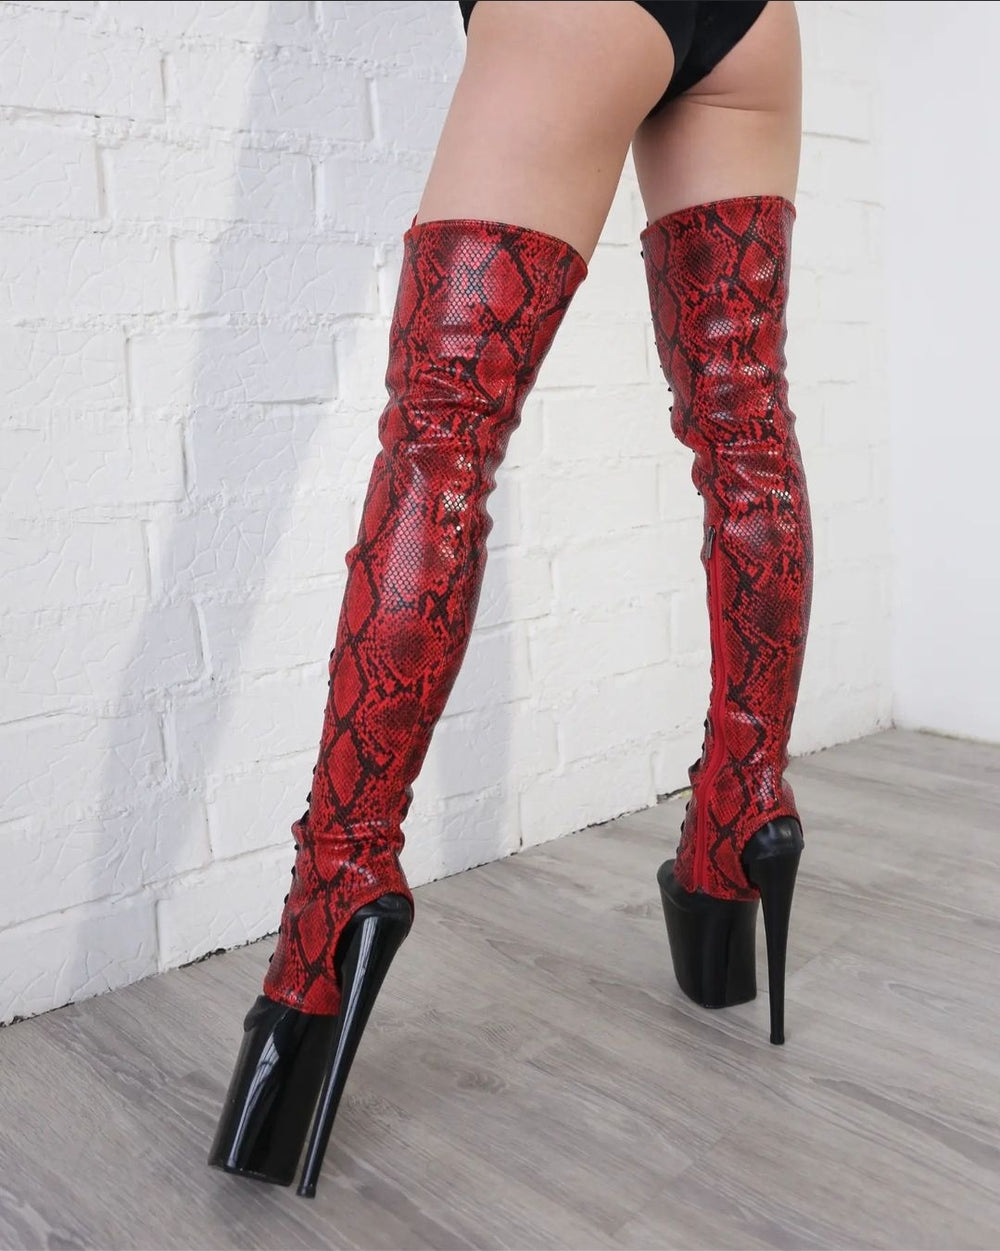 Z PLANET Thigh High Bootsleeves - Red Snake